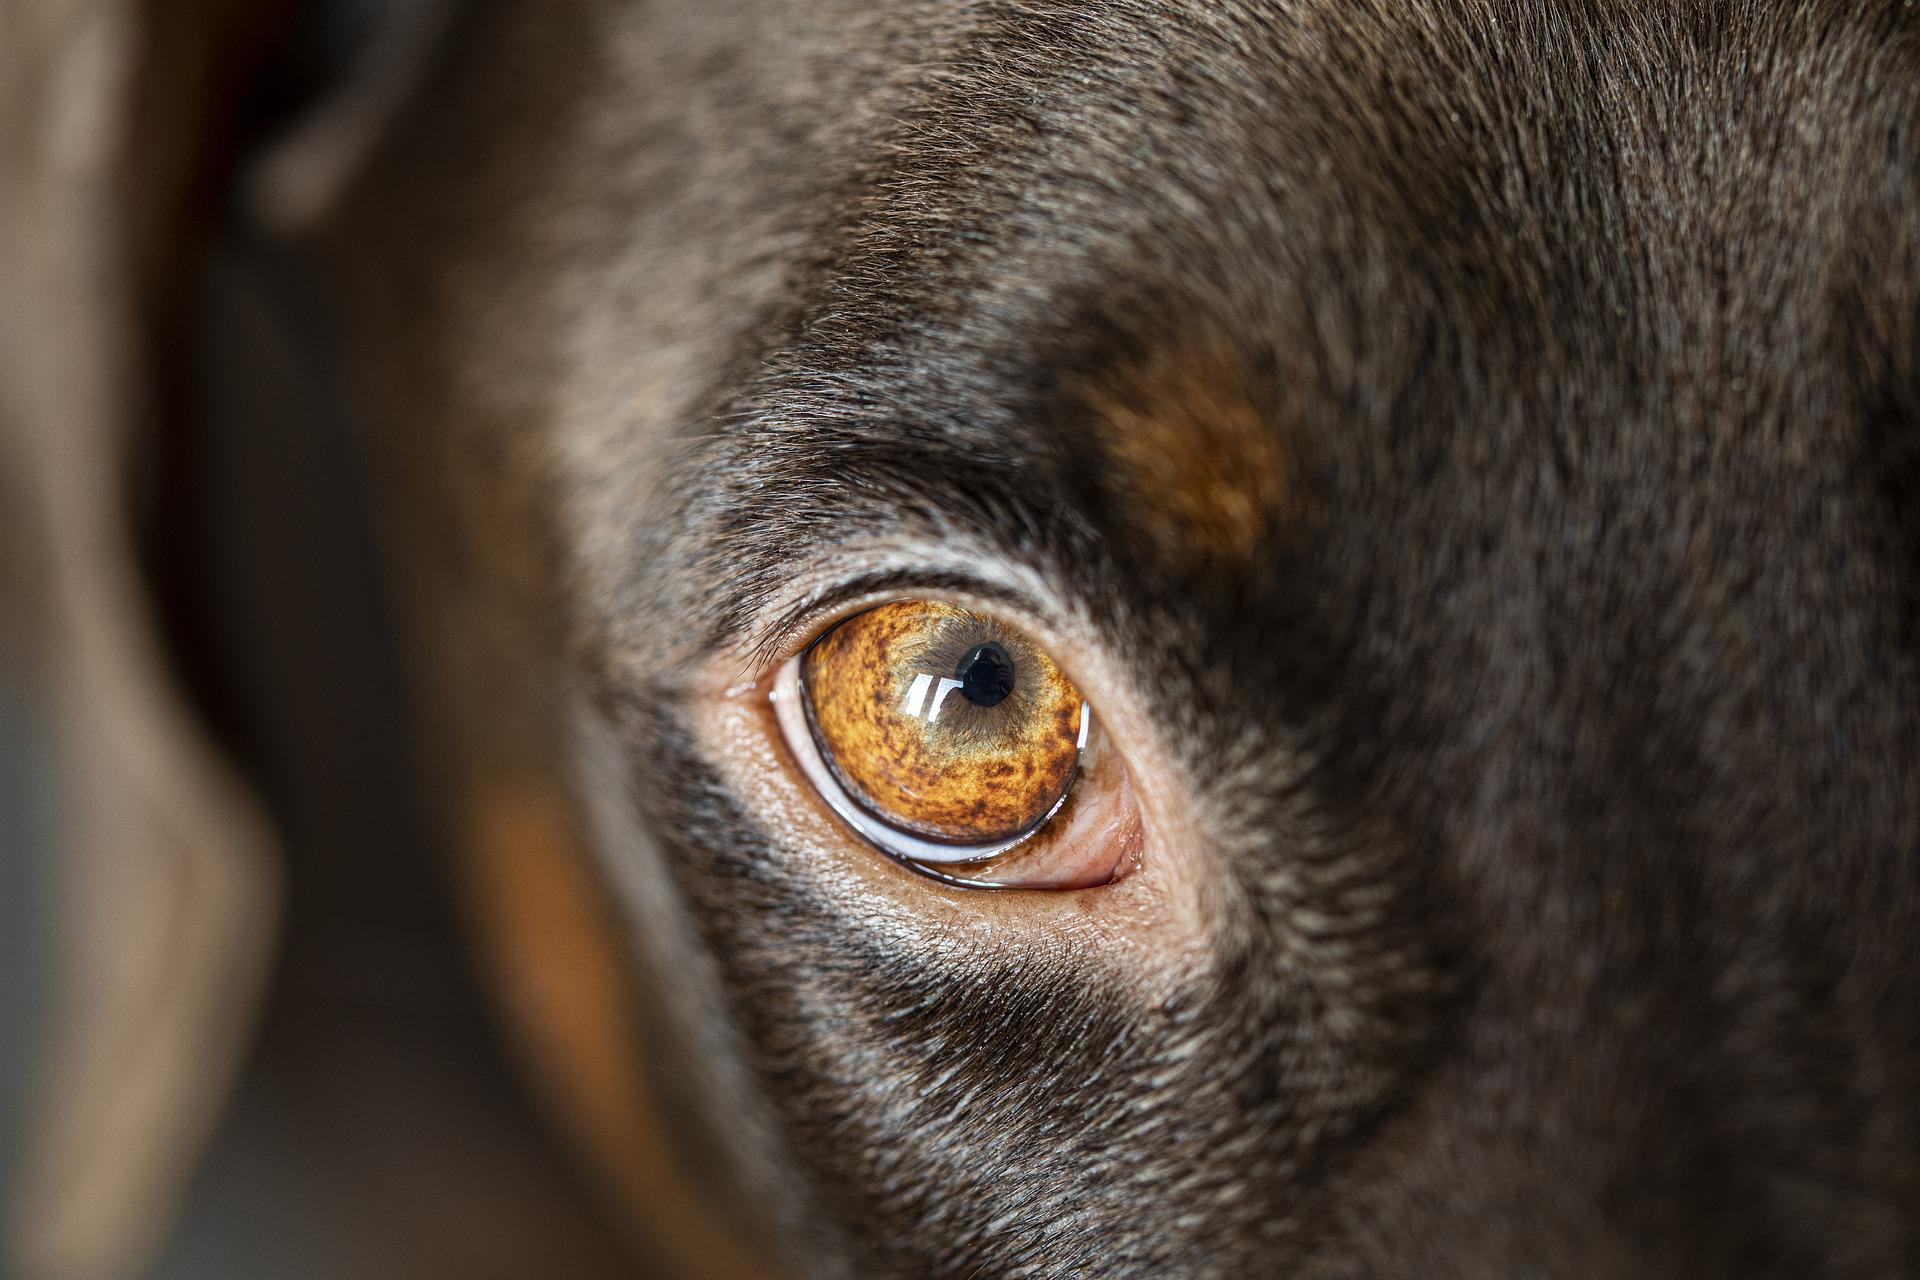 Dog Eye Problems: The Most Common Issues Your Canine Can Have